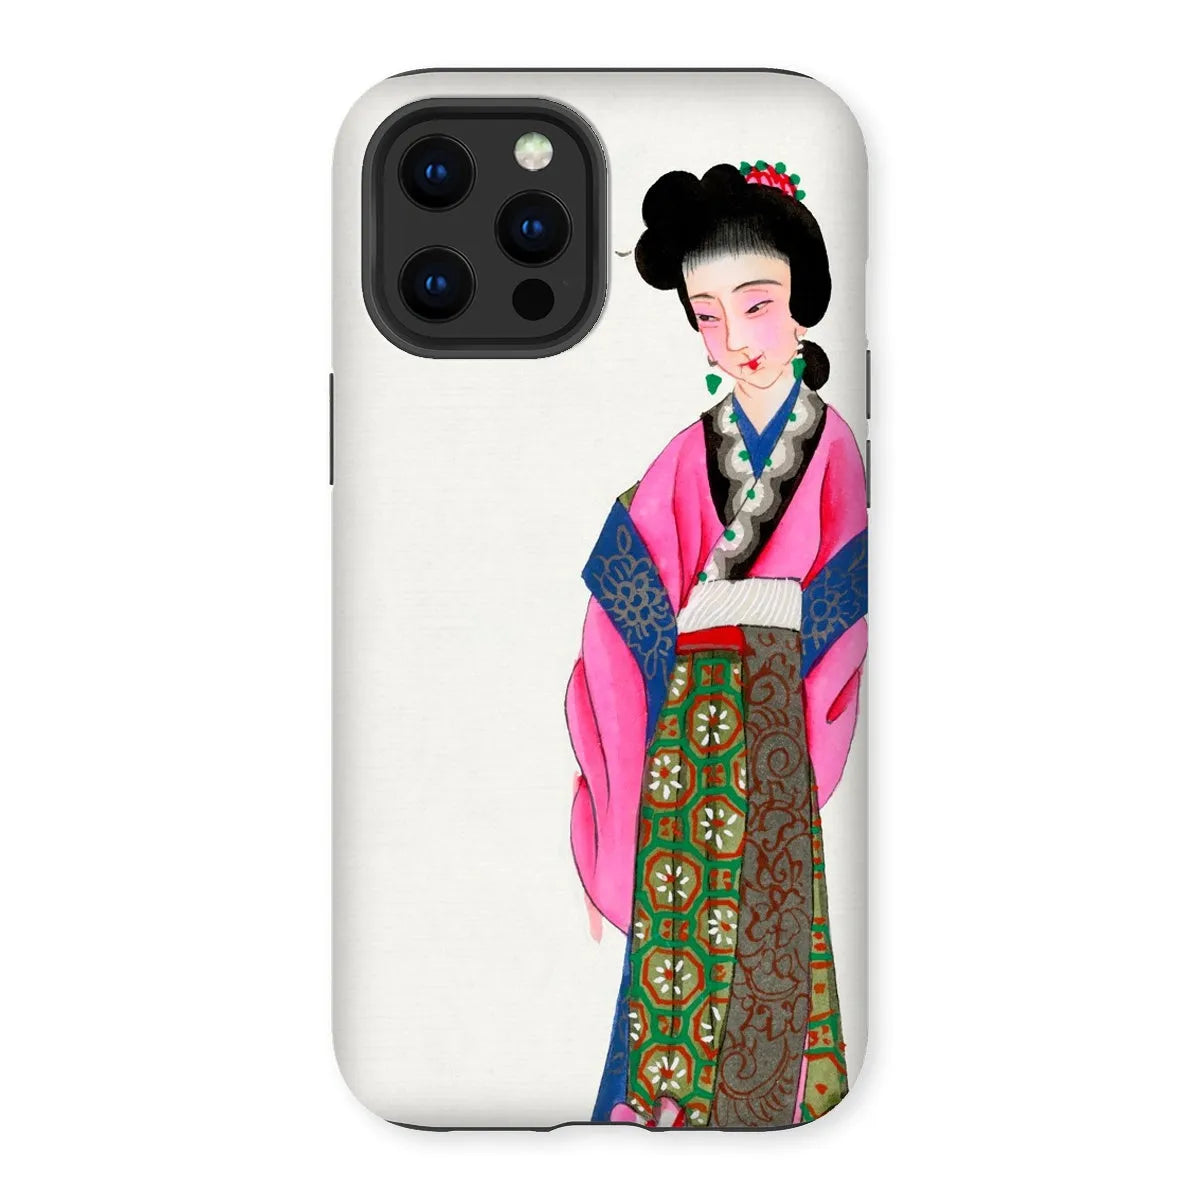 Noblewoman - Chinese Aesthetic Manchu Art Phone Case - Iphone 12 Pro Max / Matte - Mobile Phone Cases - Aesthetic Art